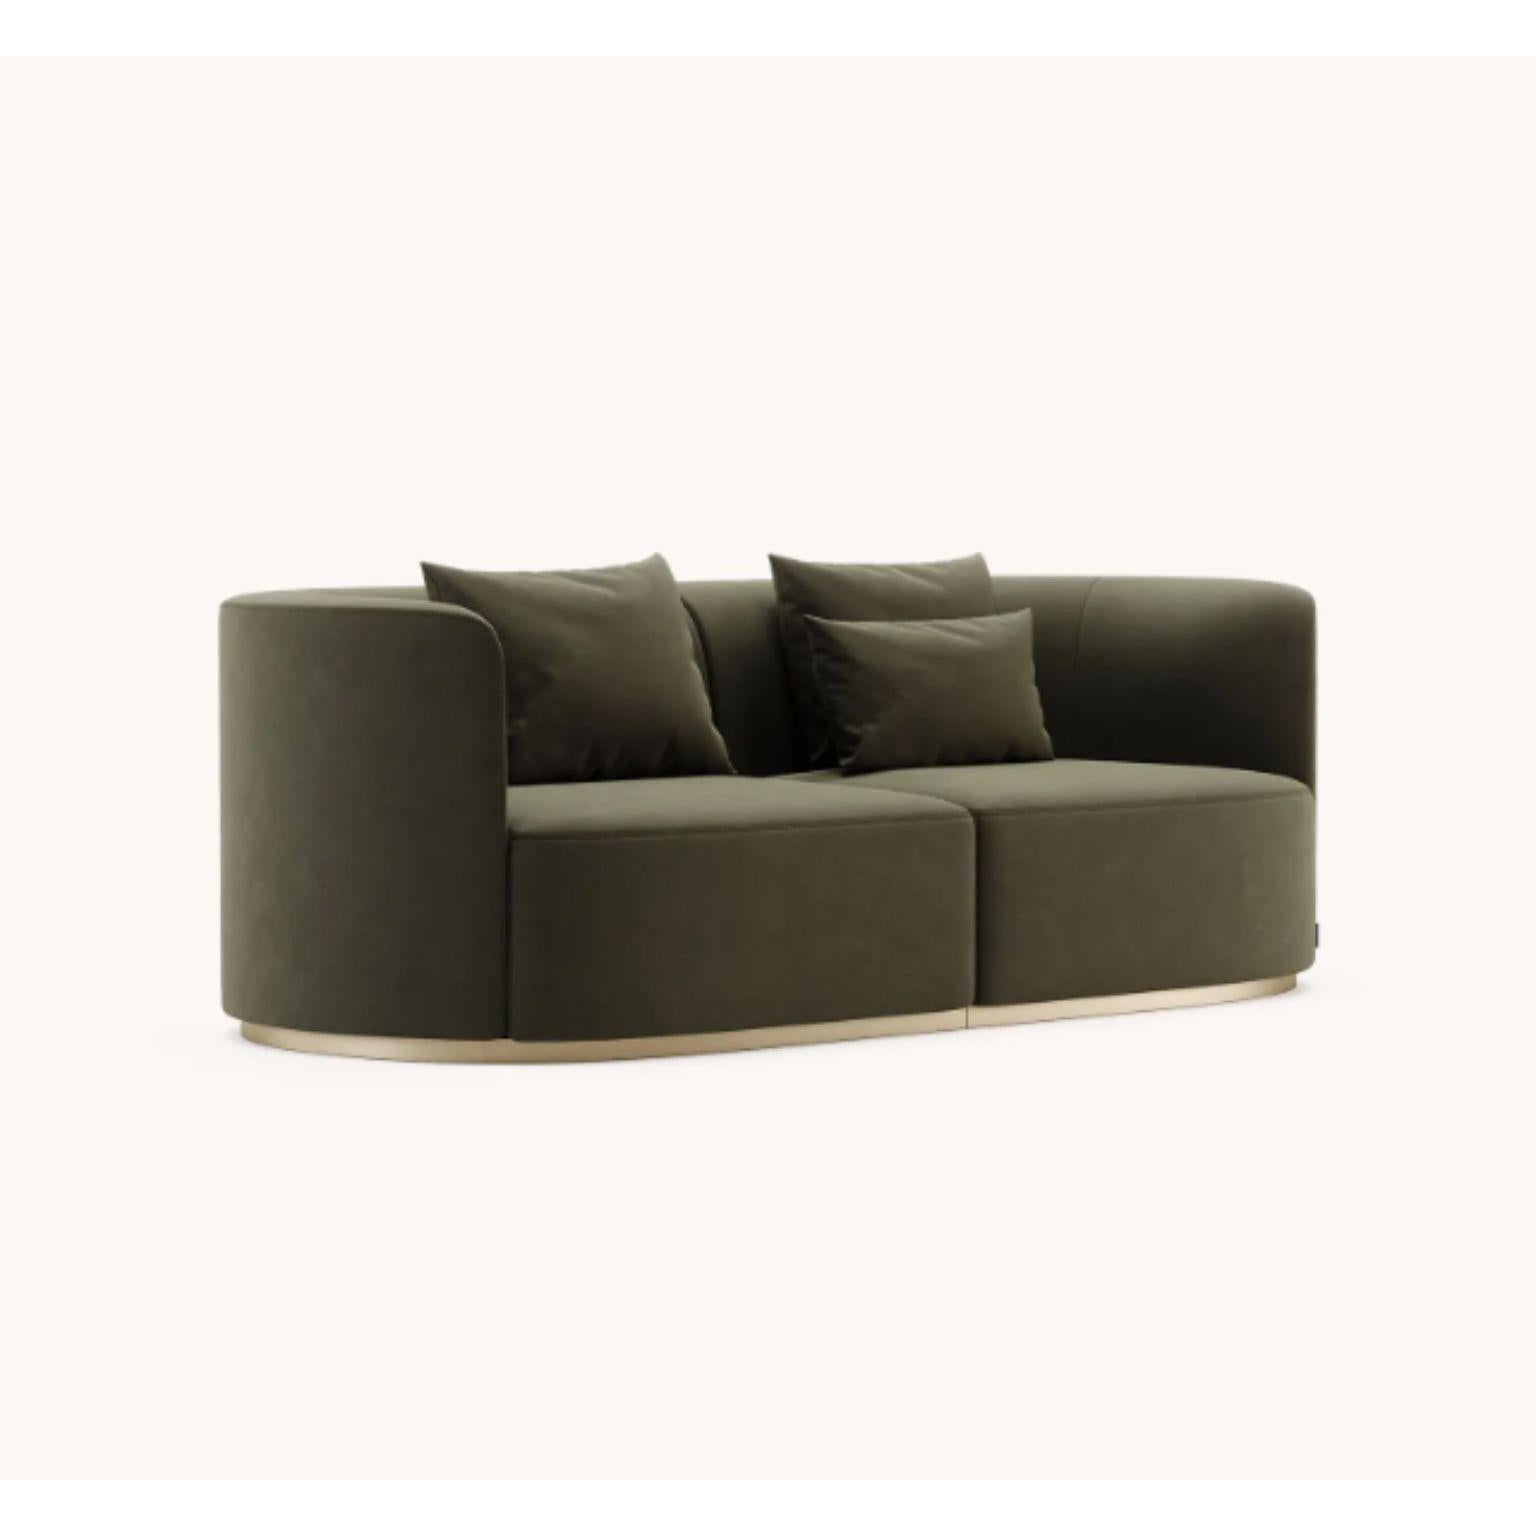 Chloe 2 seats sofa by Domkapa
Materials: Rose gold brushed, fabric (Tarn 24). 
Dimensions: W 220 x D 100 x H 75.5 cm.
Also available in different materials. Please contact us.

Chloe is an outstanding design piece with striking aesthetic